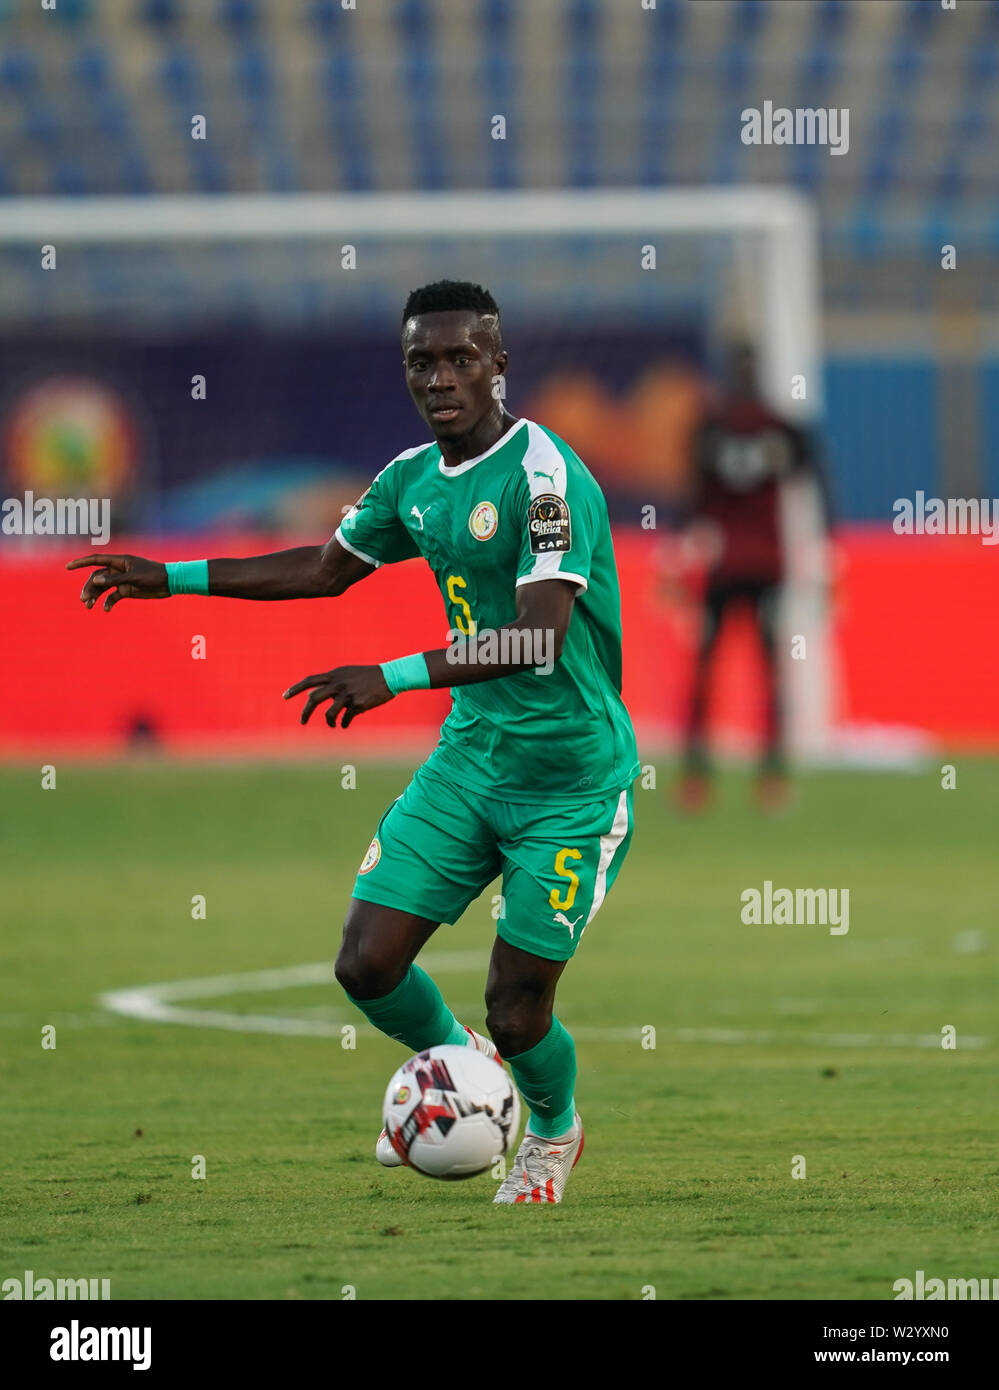 Cairo, Senegal, Egypt. 10th July, 2019. FRANCE OUT July 10, 2019: Idrissa Gana Gueye of Senegal during the 2019 African Cup of Nations match between Senegal and Benin at the 30 June Stadium in Cairo, Egypt. Ulrik Pedersen/CSM/Alamy Live News Stock Photo